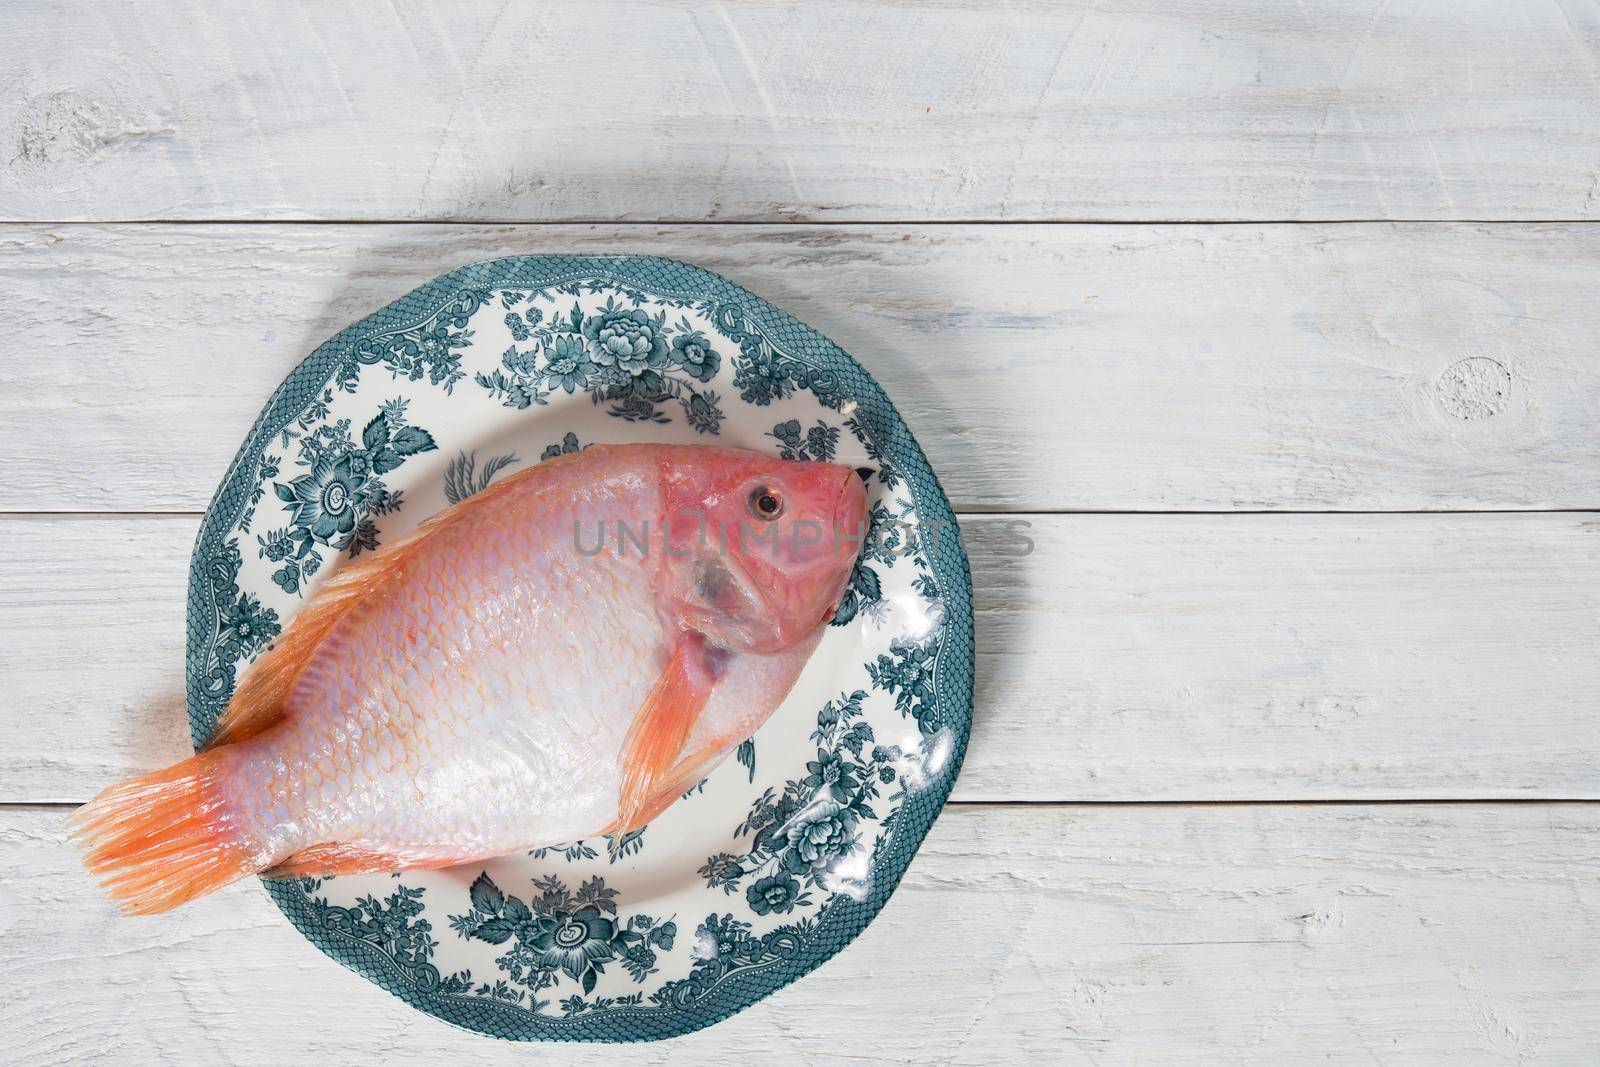 raw pink tilapia fish lies on a plate with blue ornaments on white wooden boards by KaterinaDalemans